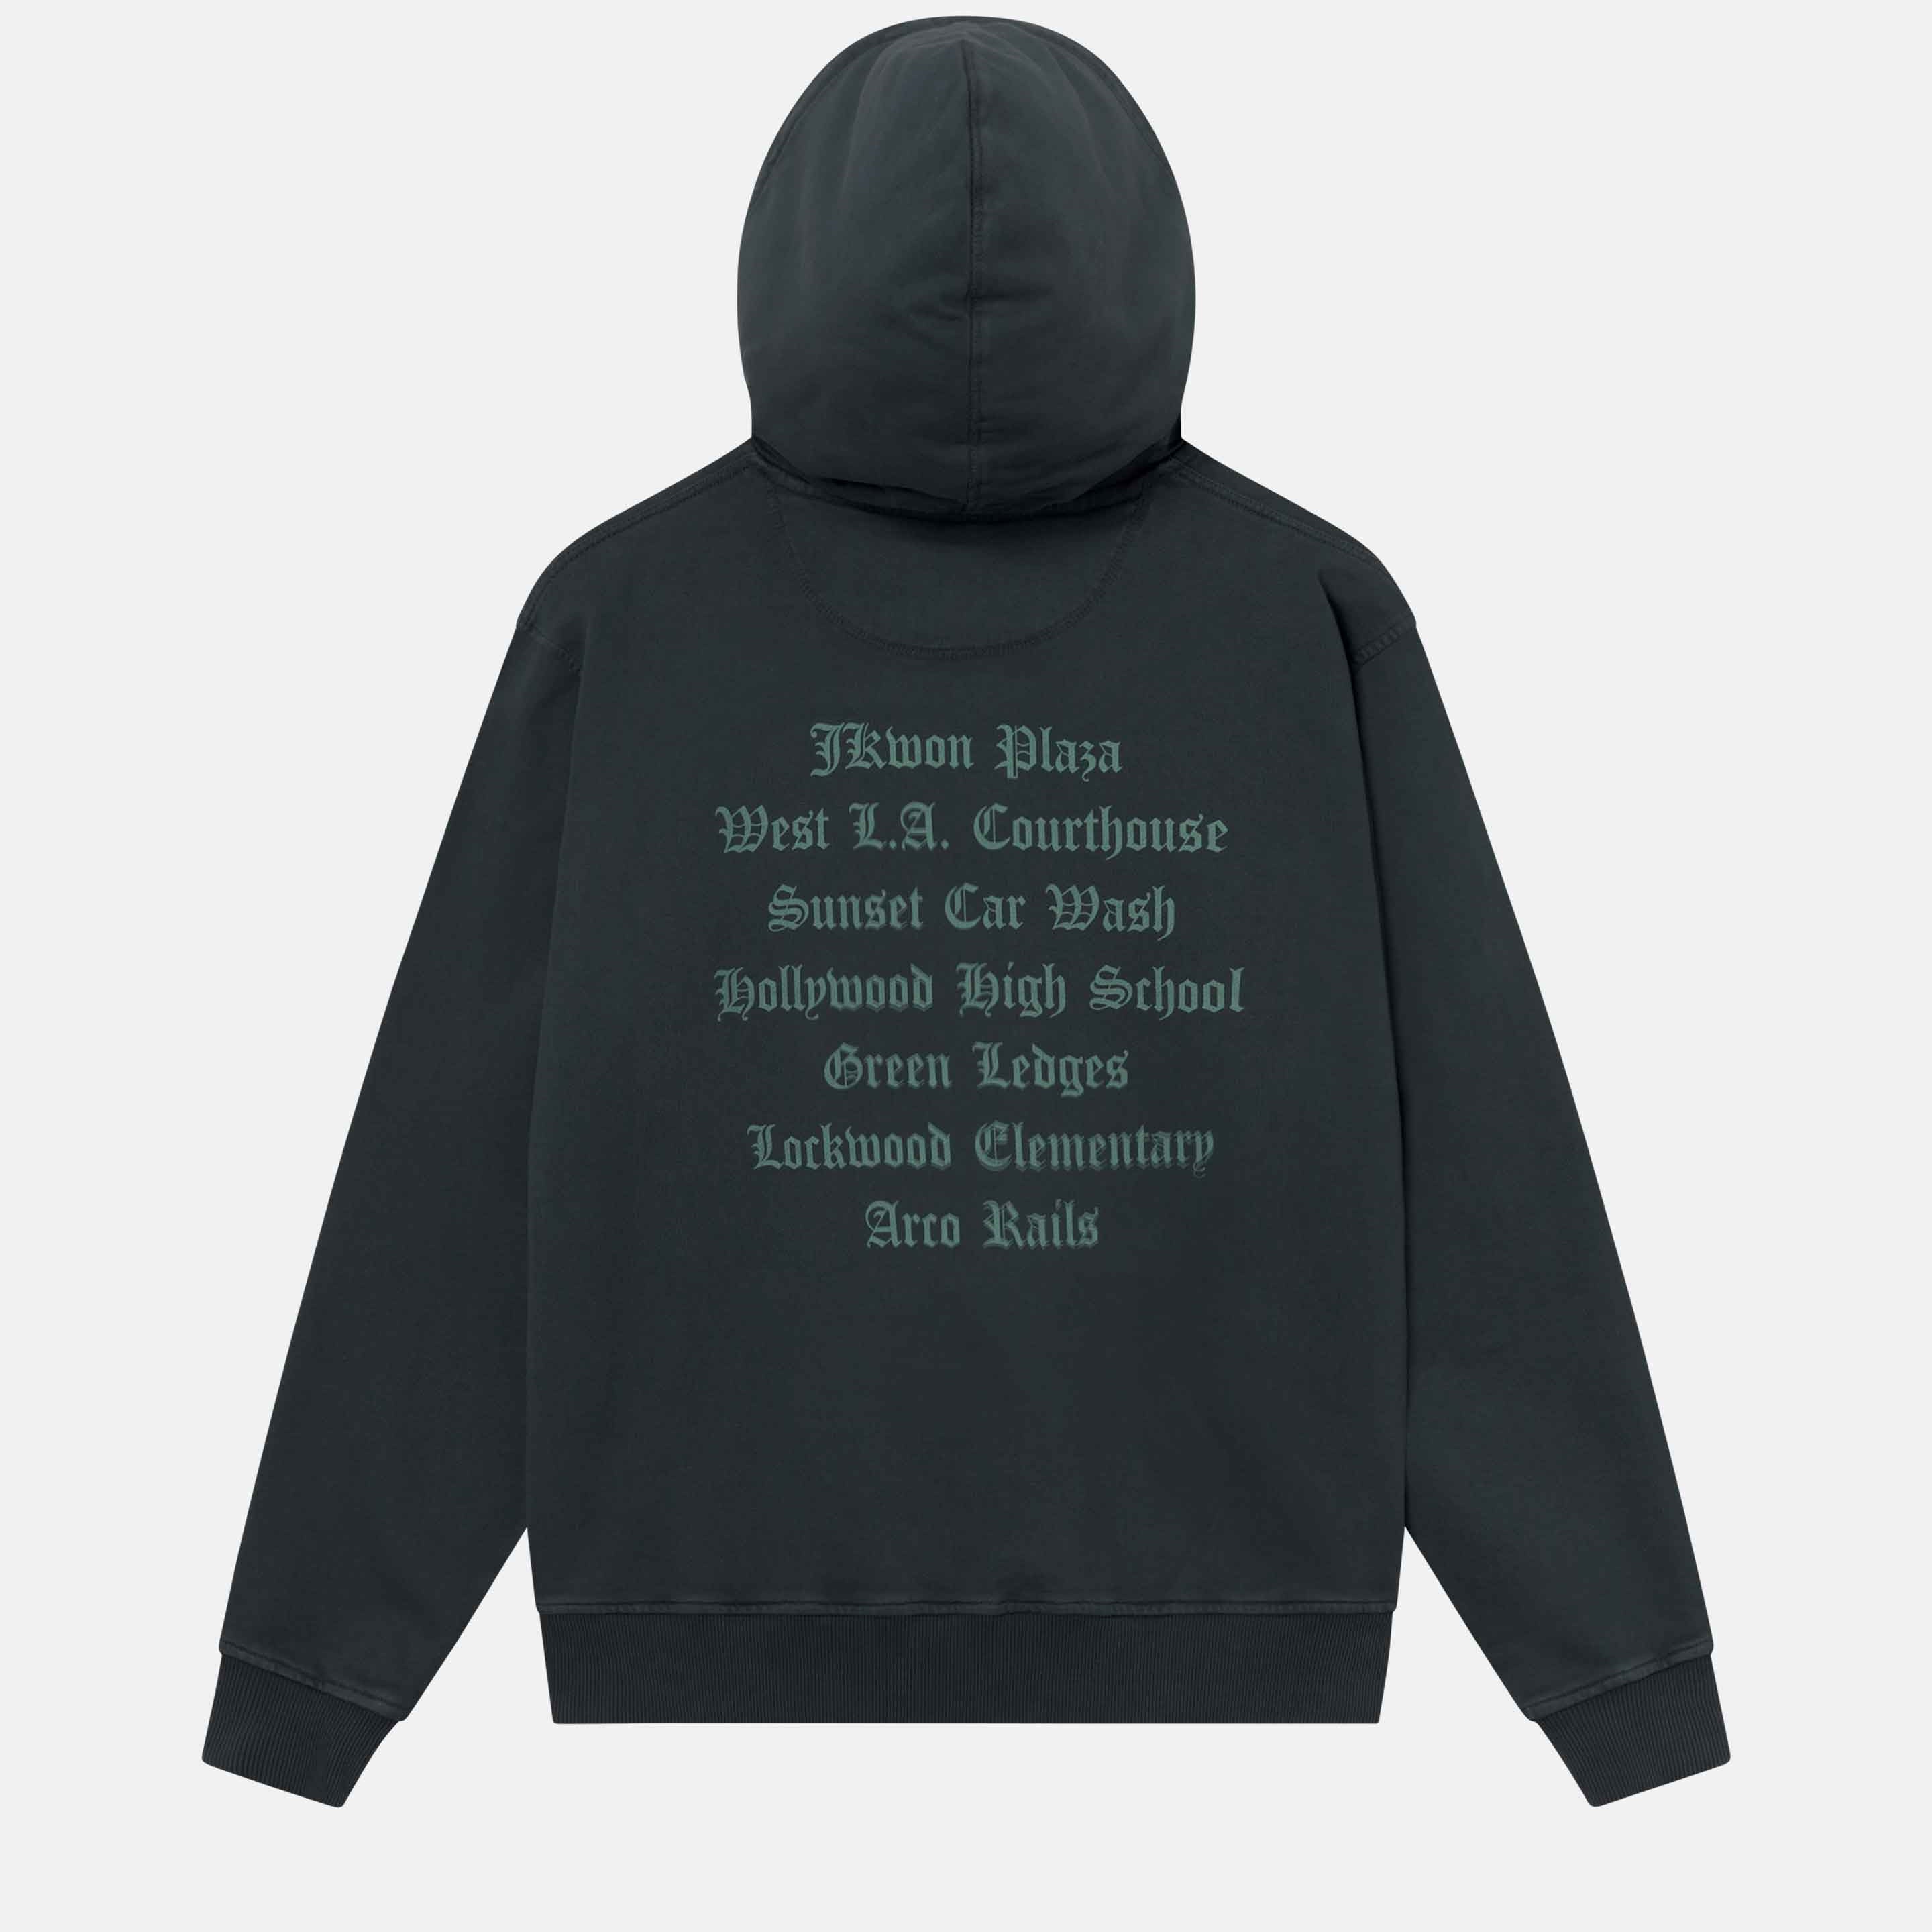 A black hoodie with a large green text print on its back